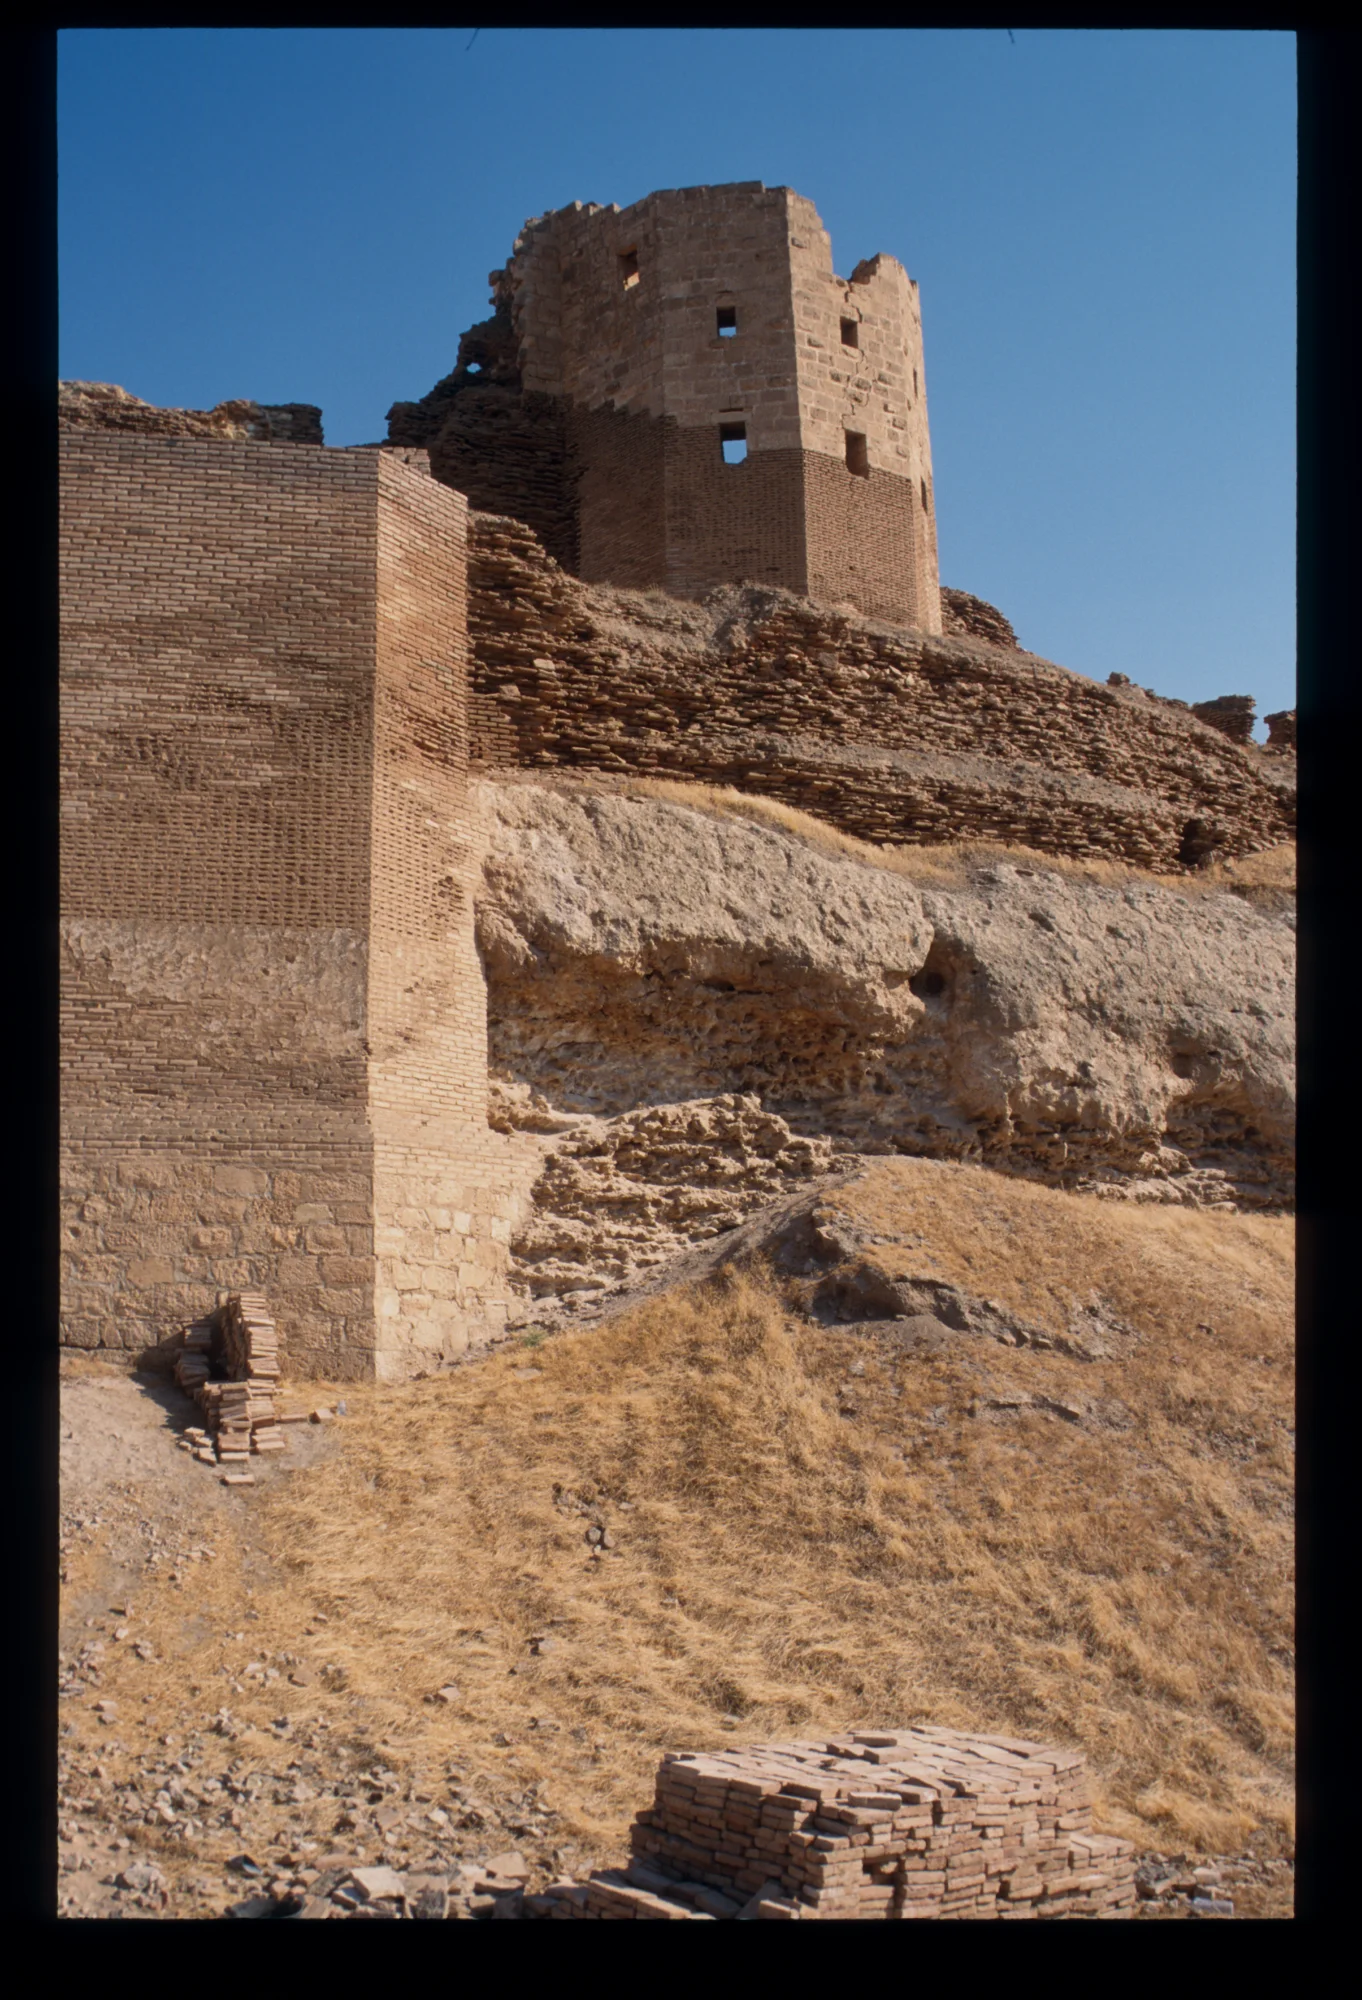 A photo of two towers, Jaʿbar castle